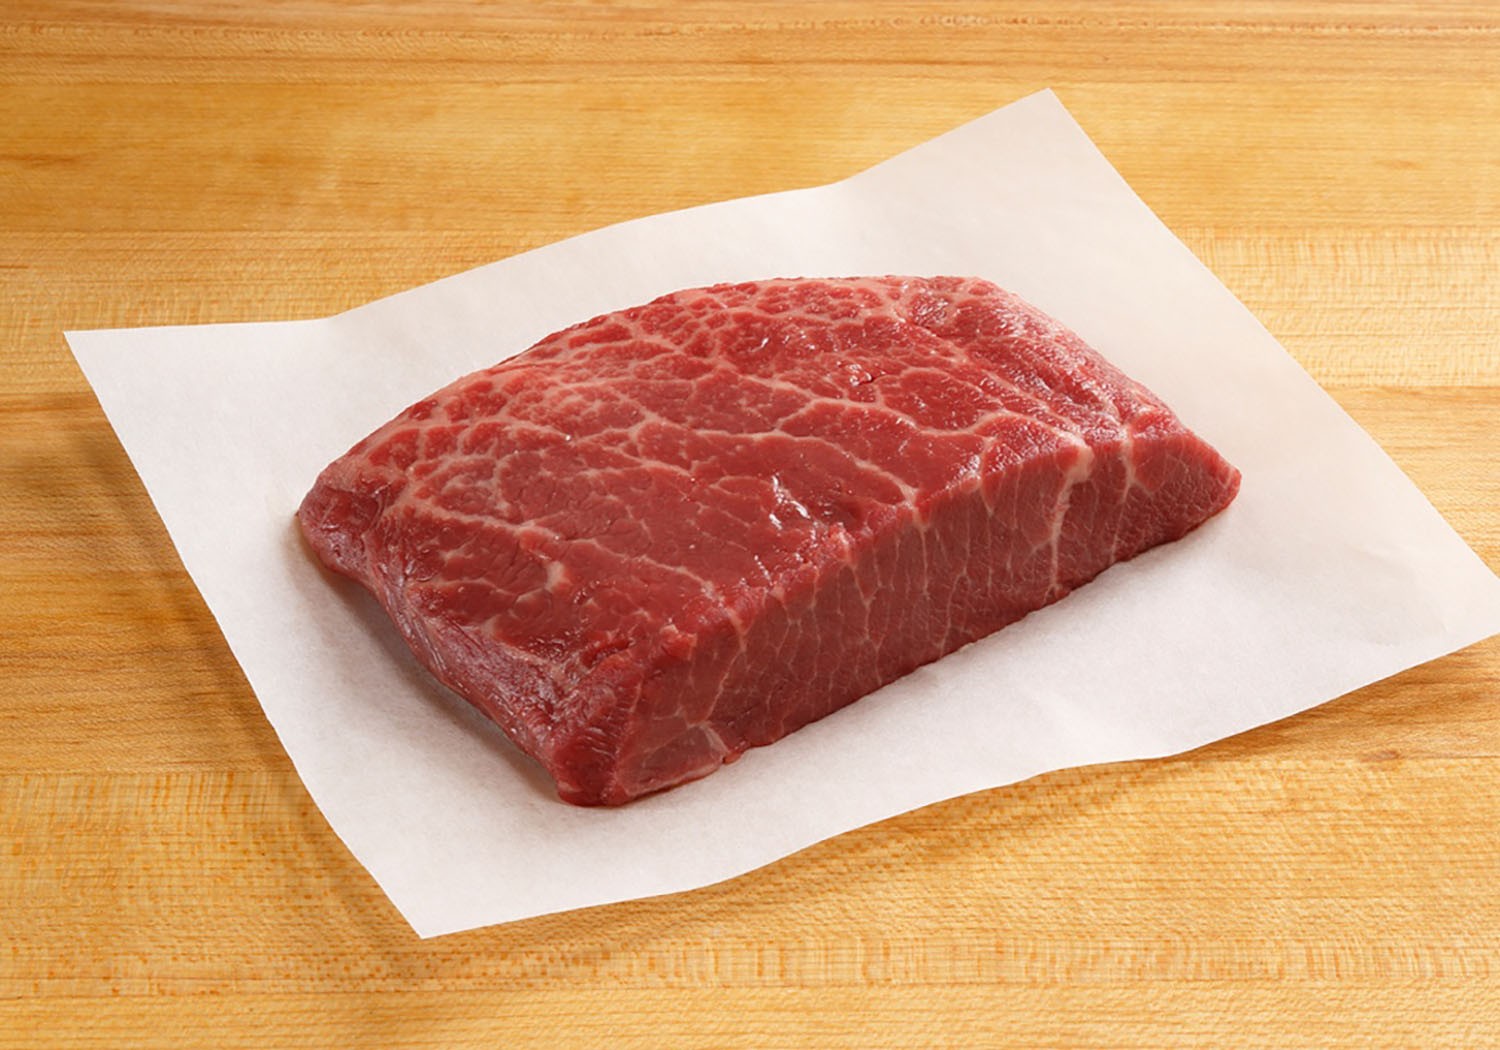 Flat Iron Steak: Juicy and Tender with Grilling and Marinade